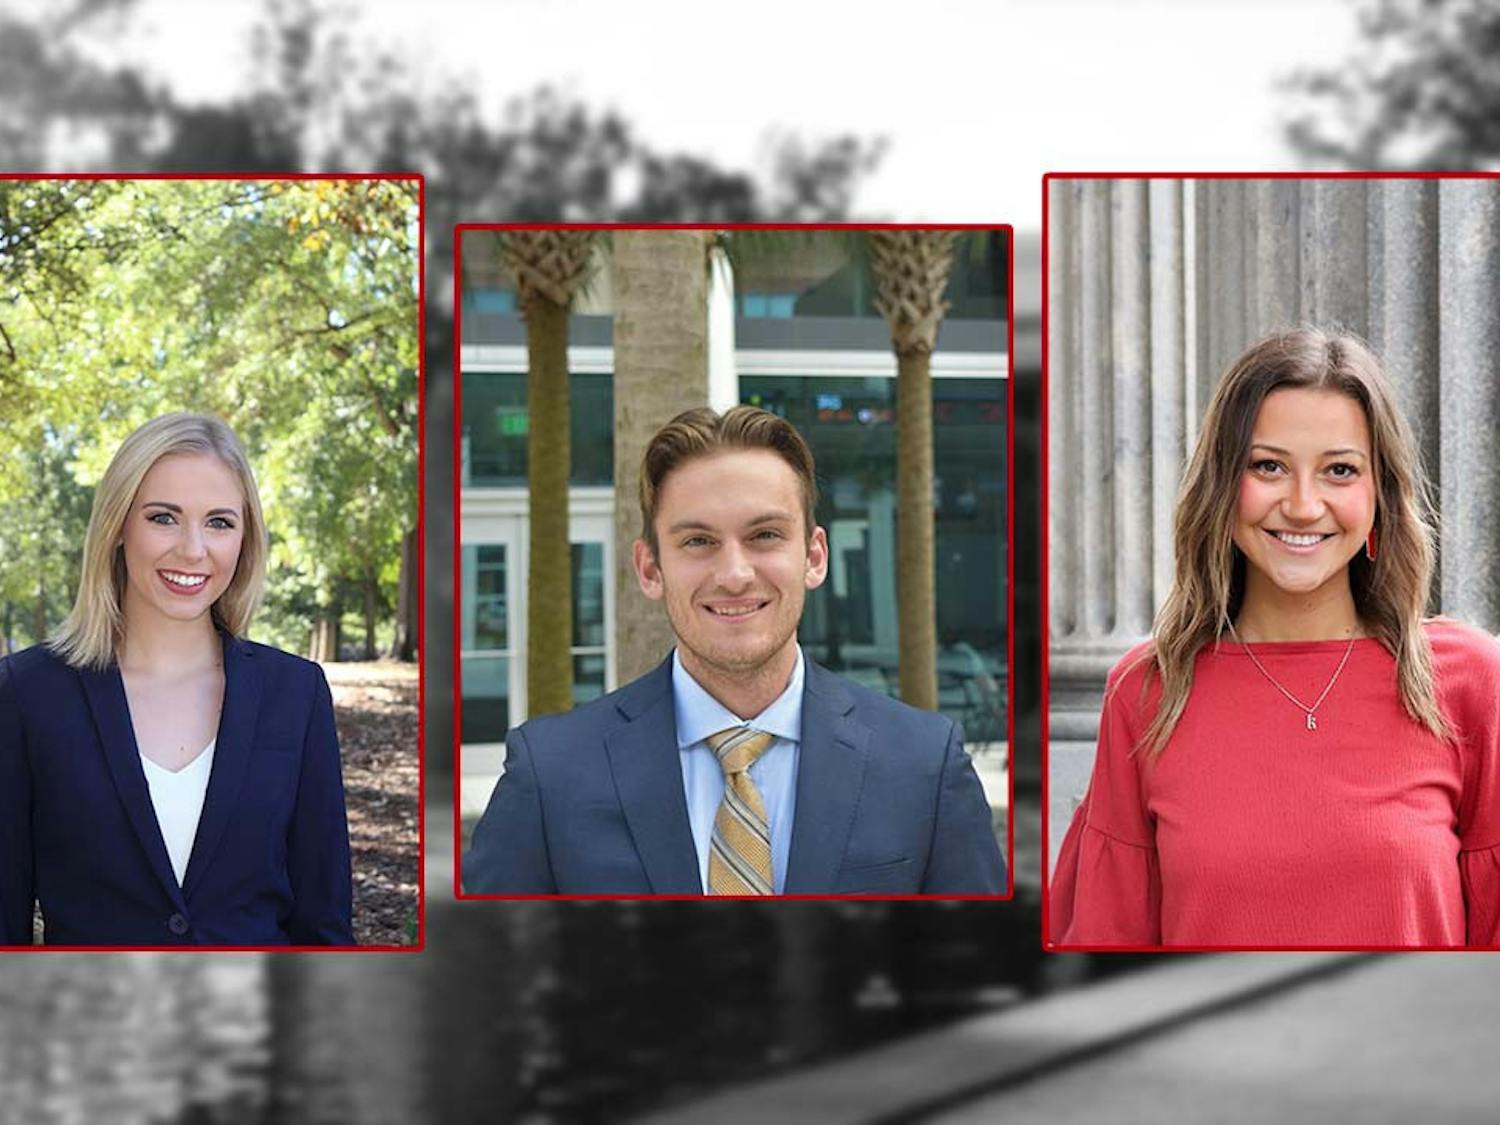 (Left to right) Former student body treasurer Laney Quickel, division secretary of finance Jason Zapranzy, and former student body treasurer Kate Turner. Voting to re-establish the Office of Student Body treasurer and create a student senate delegation for CarolinaLIFE has been postponed.